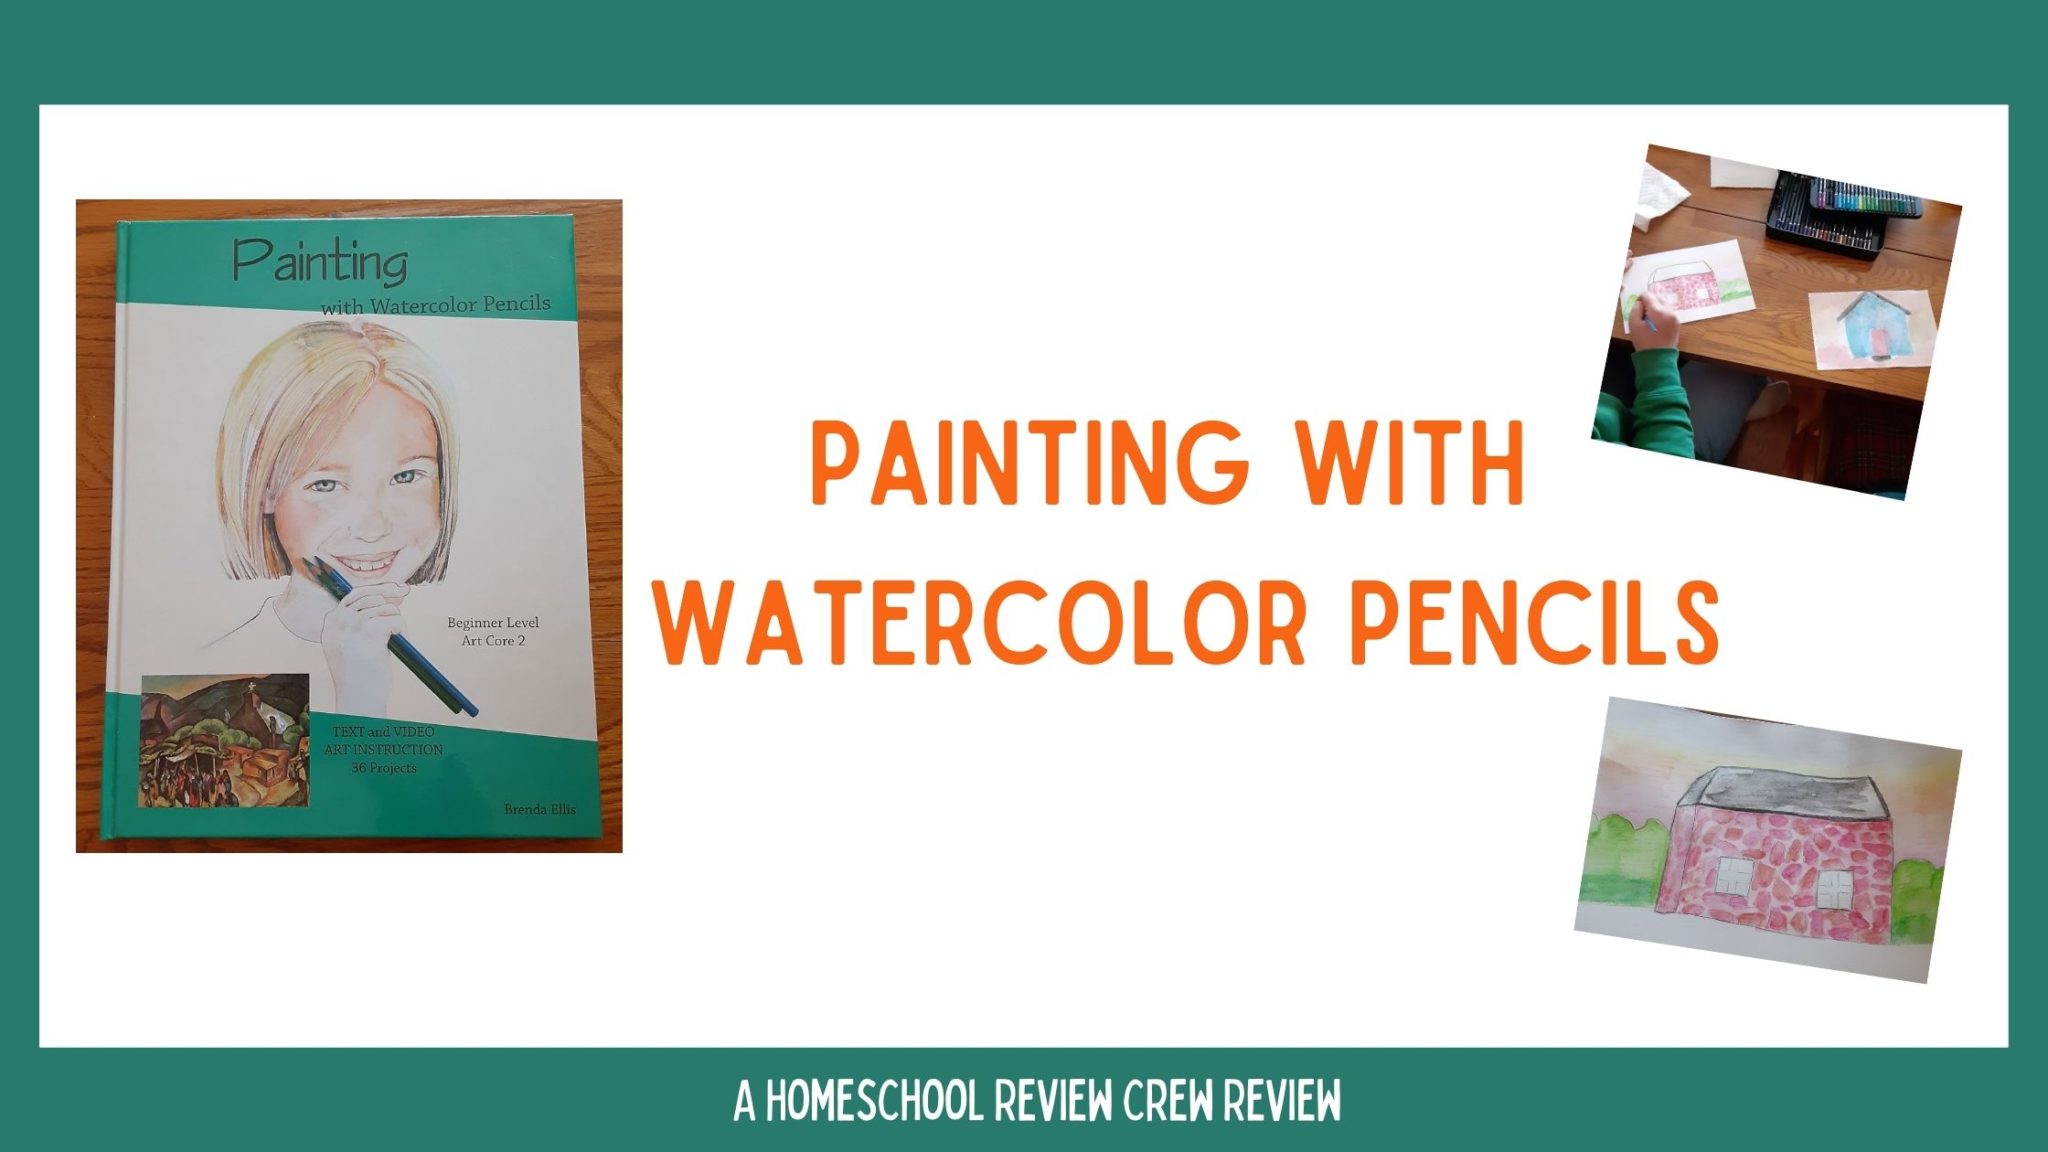 You are currently viewing Make Art Education Fun With This Watercolor Pencils Course